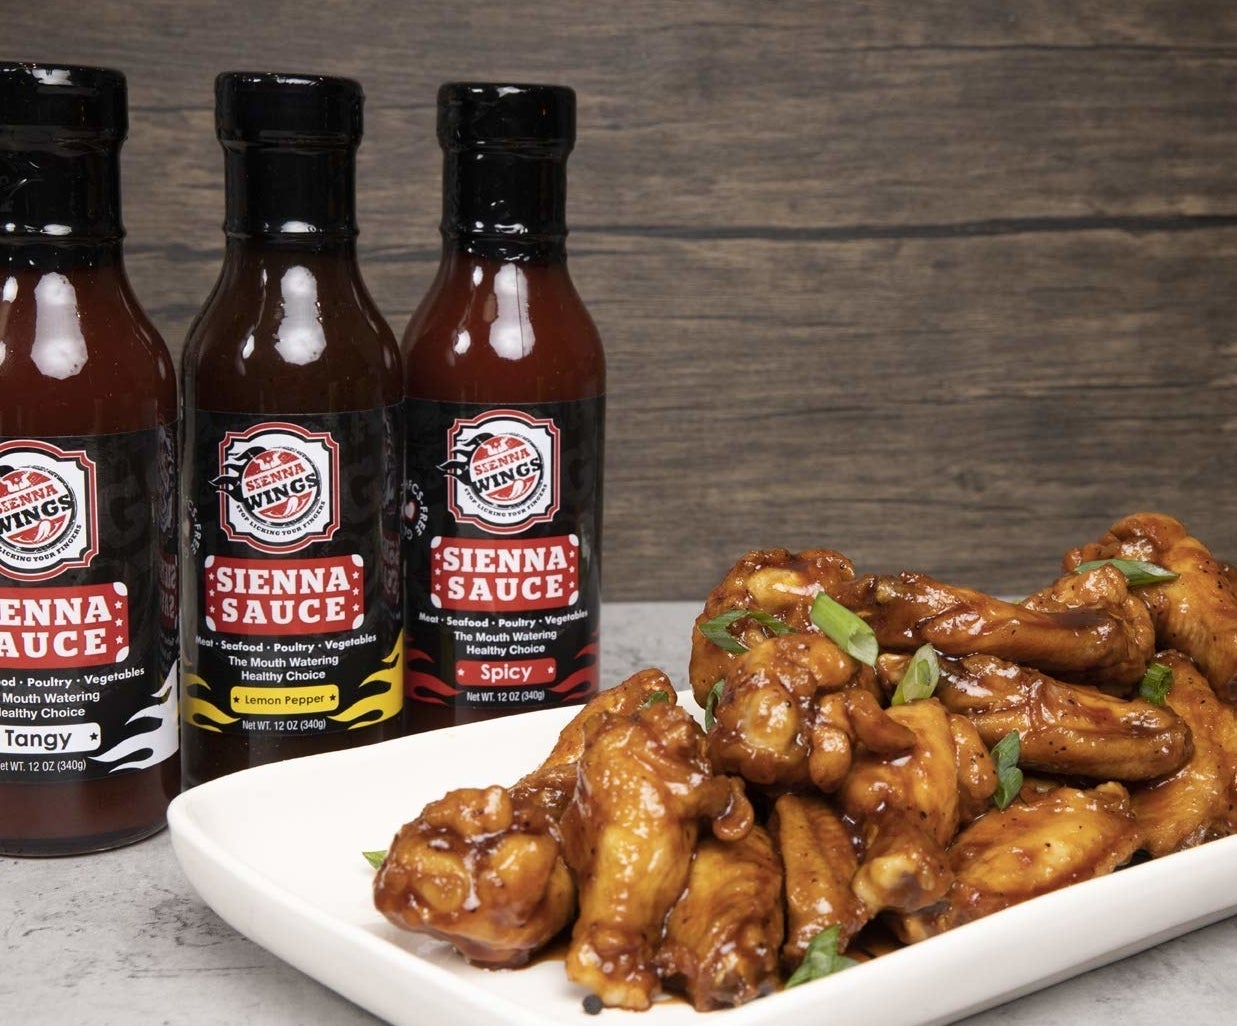 three bottles of Sienna Sauce sitting next to a plate of wings